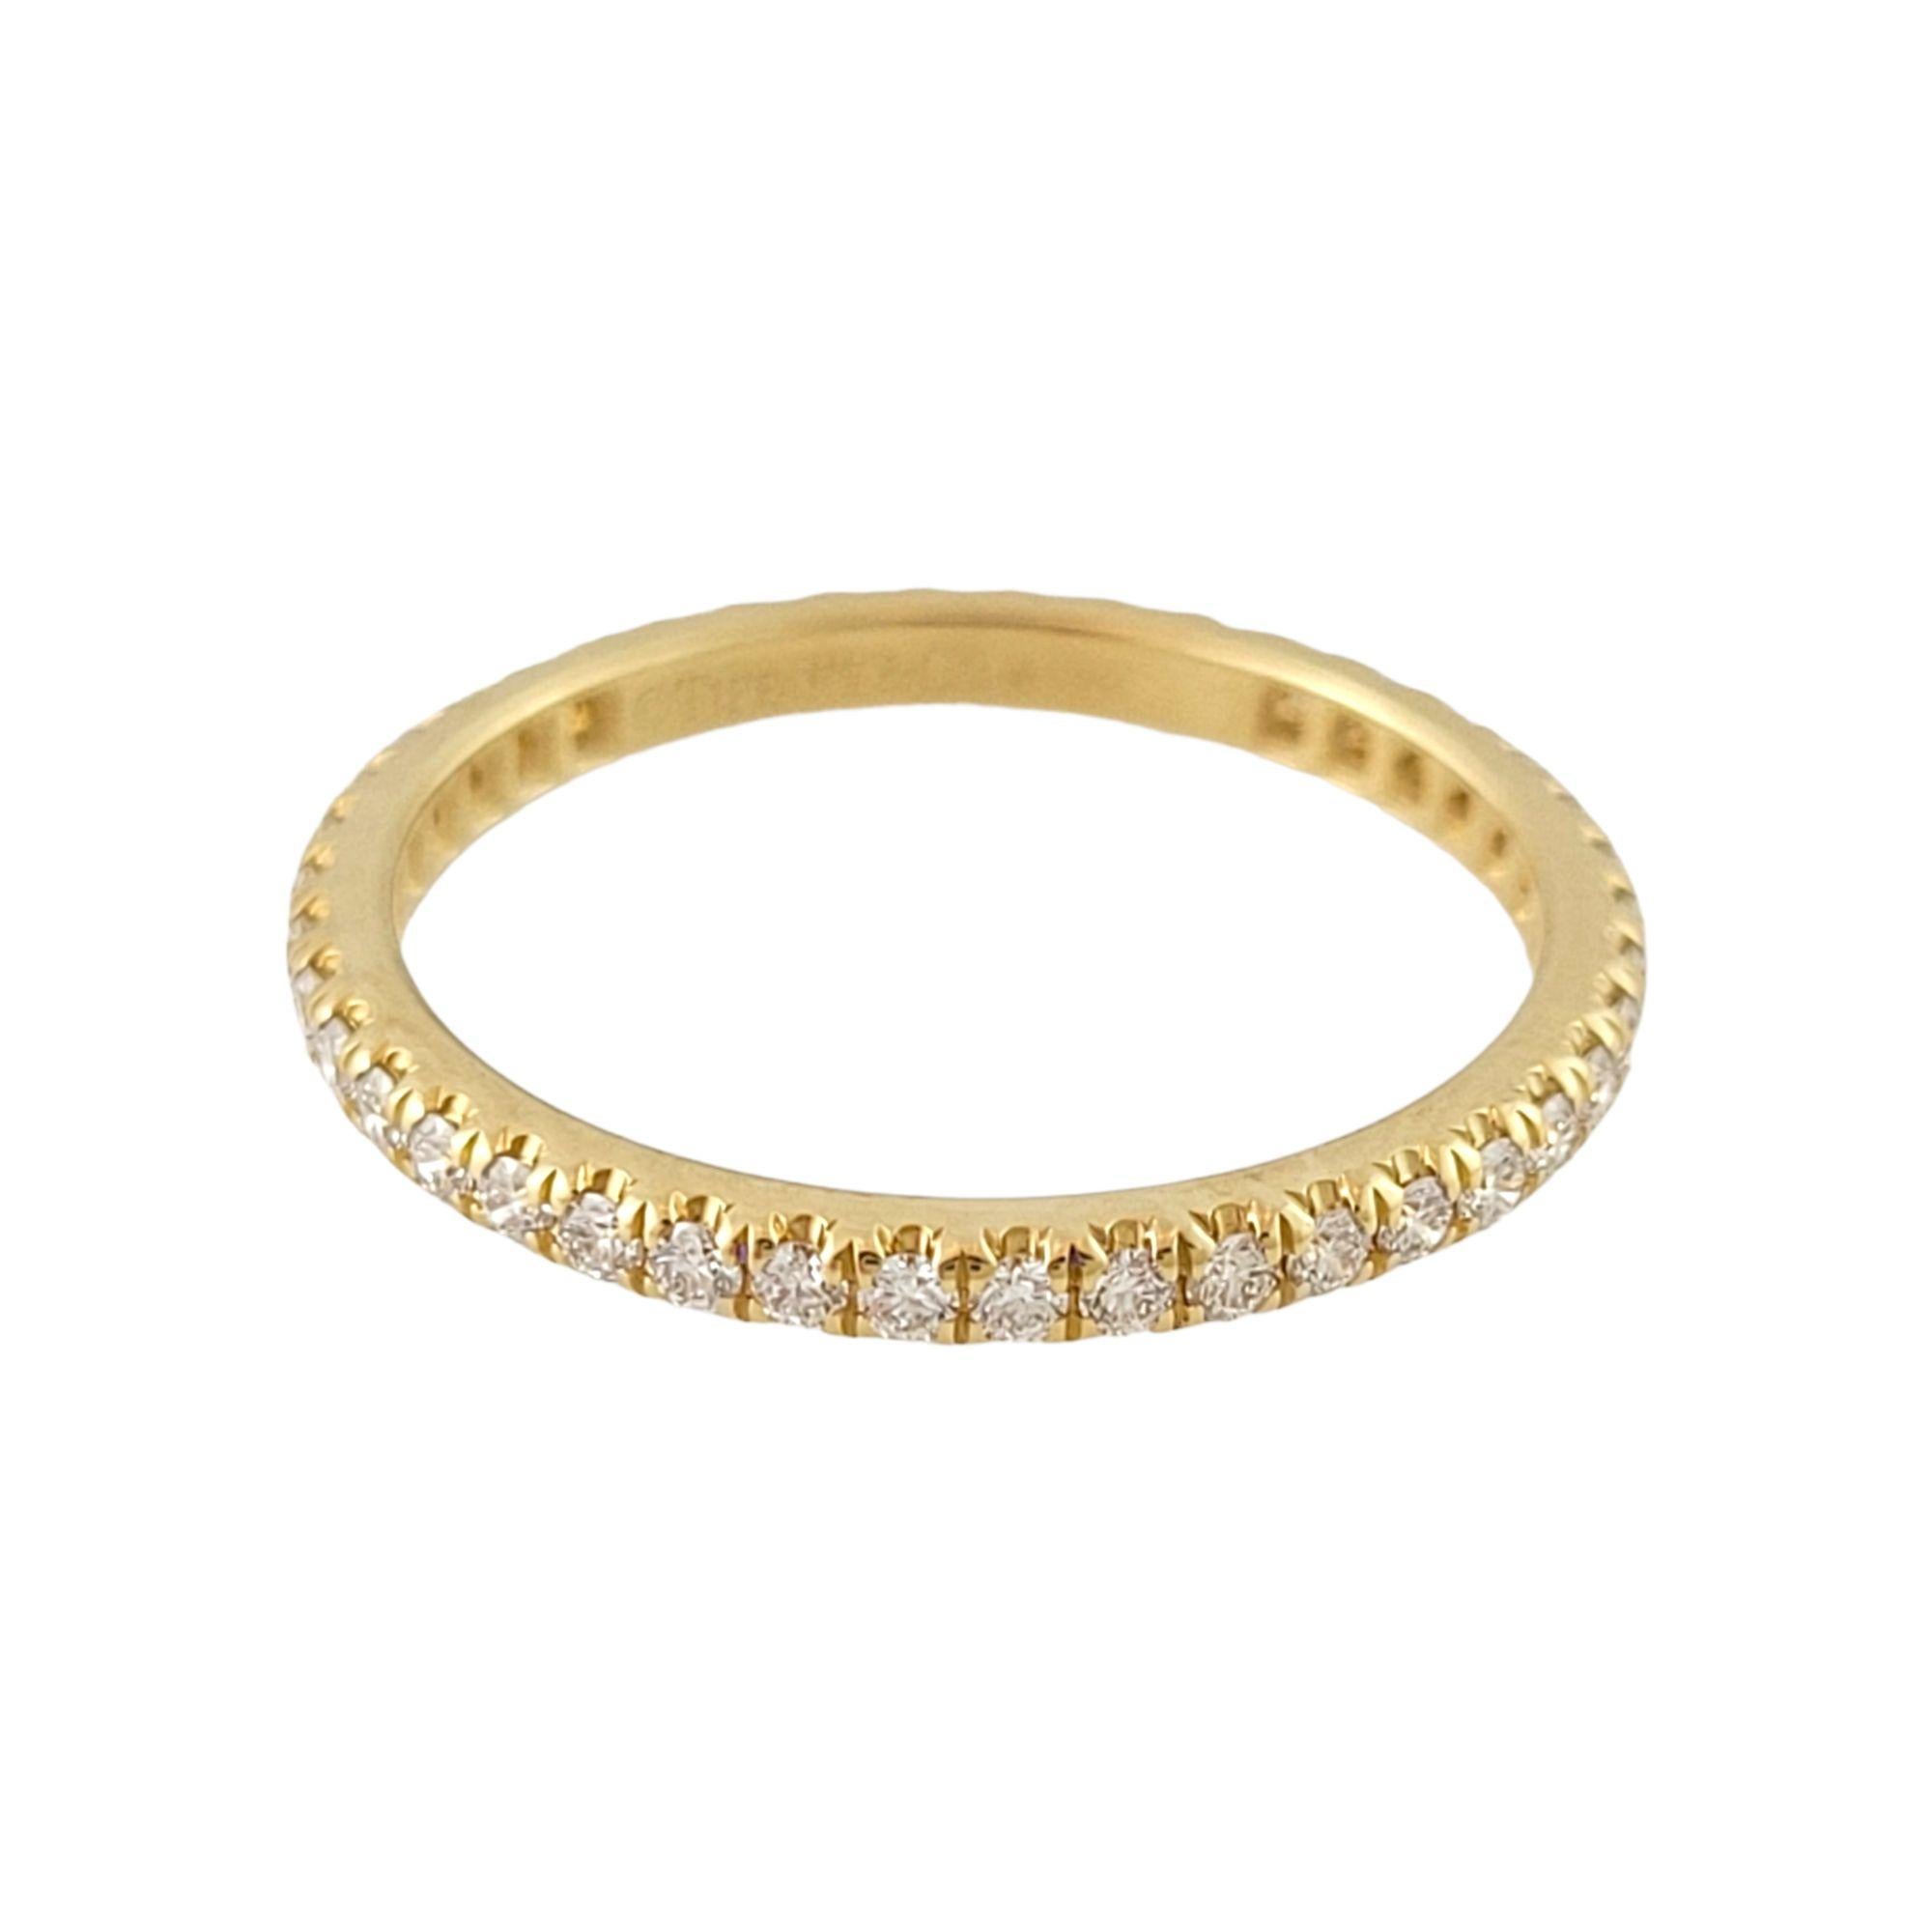 Tiffany & Co. Soleste 18K Yellow Gold Diamond Eternity Band

This gorgeous full circle diamond eternity band by Tiffany is set with 41 round brilliant diamonds totalling .33cts.

Diamonds are of VS2 clarity and D-G color.

Band is approx. 2mm